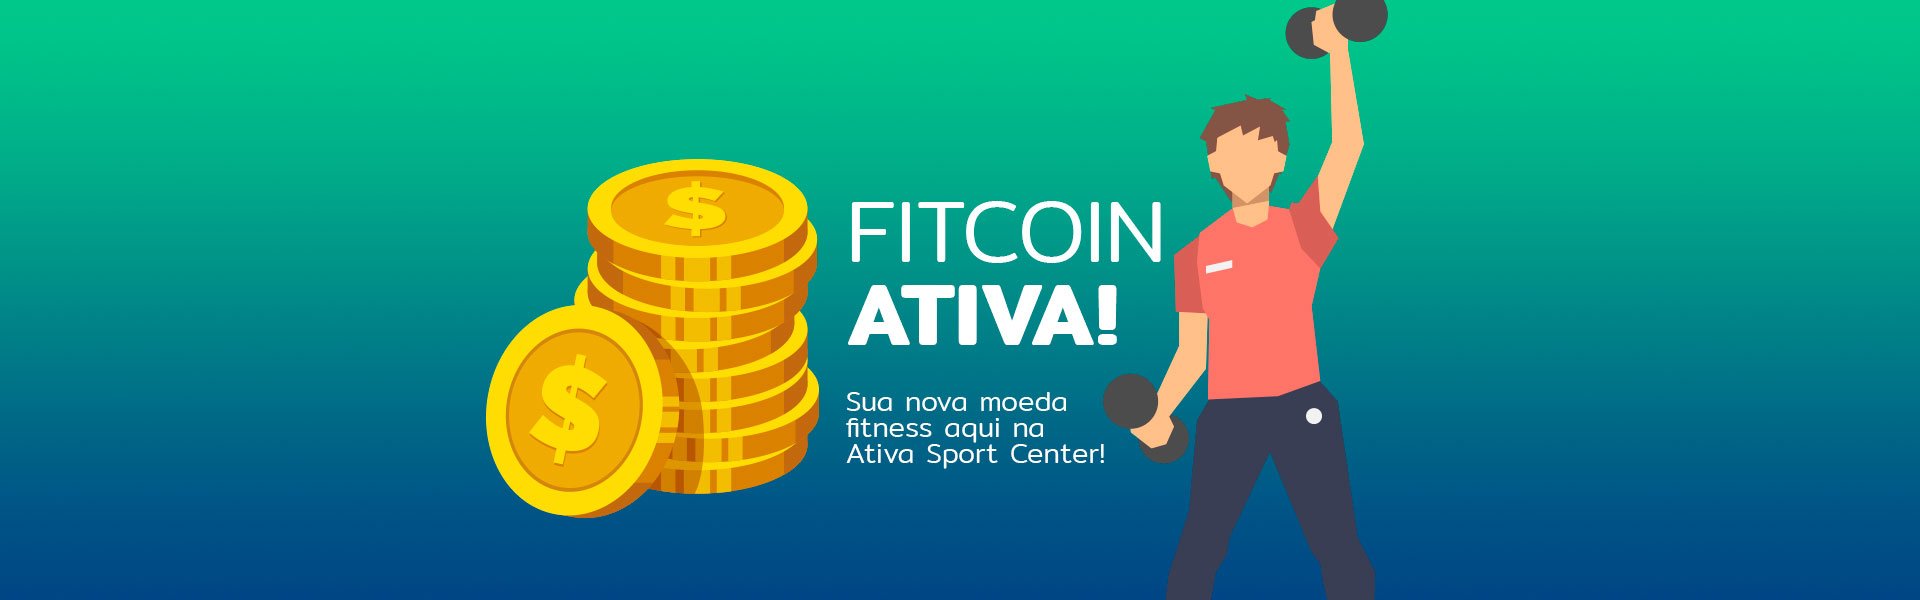 FitCoin